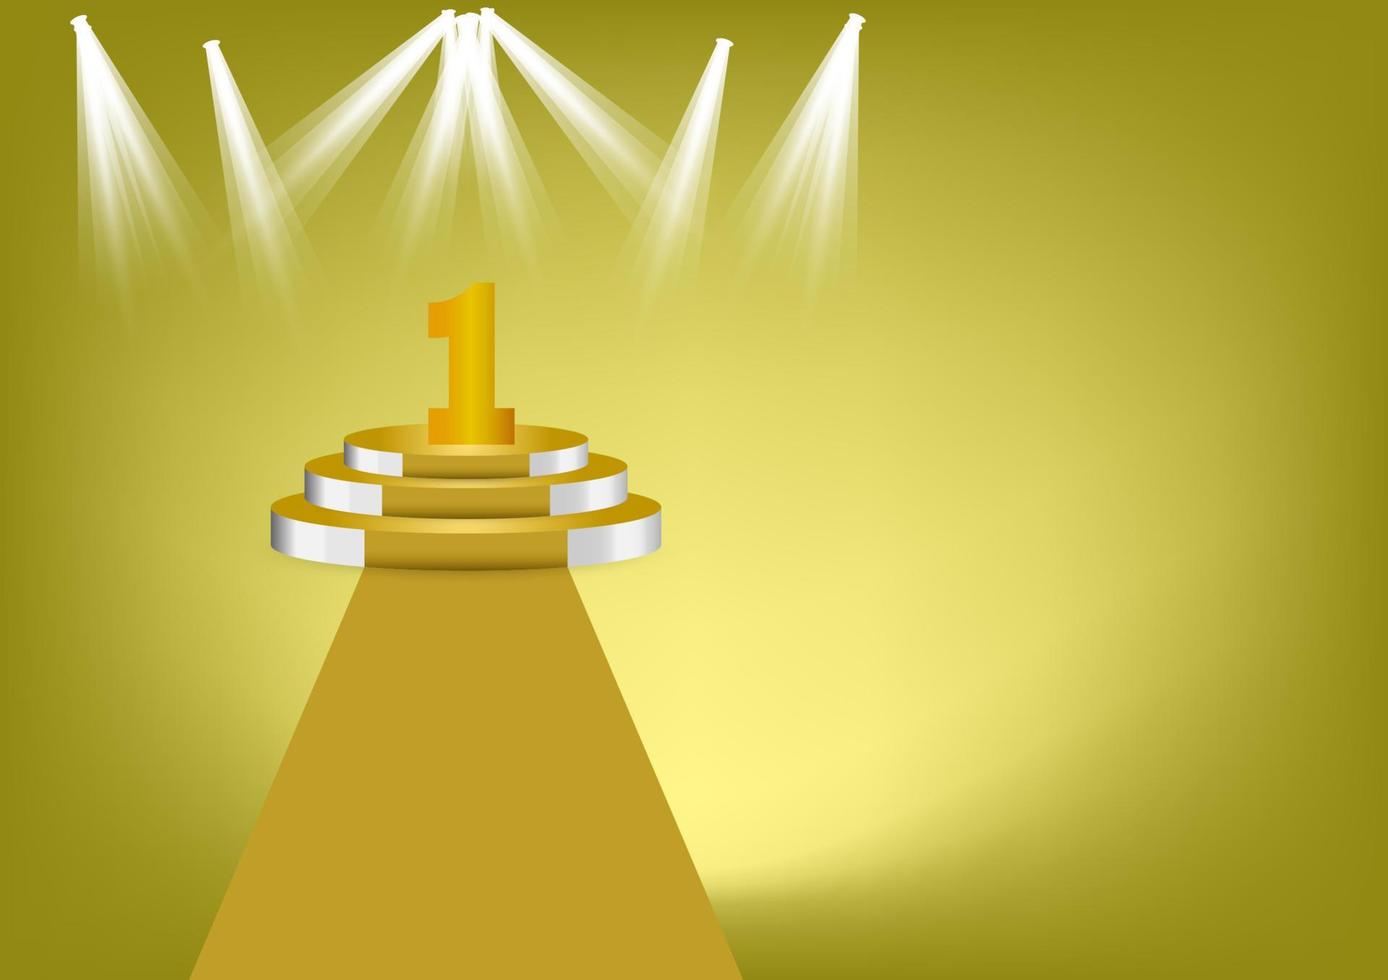 number 1 gold color on gold podium is the winner is in first Vector illustration with gold color background copy space